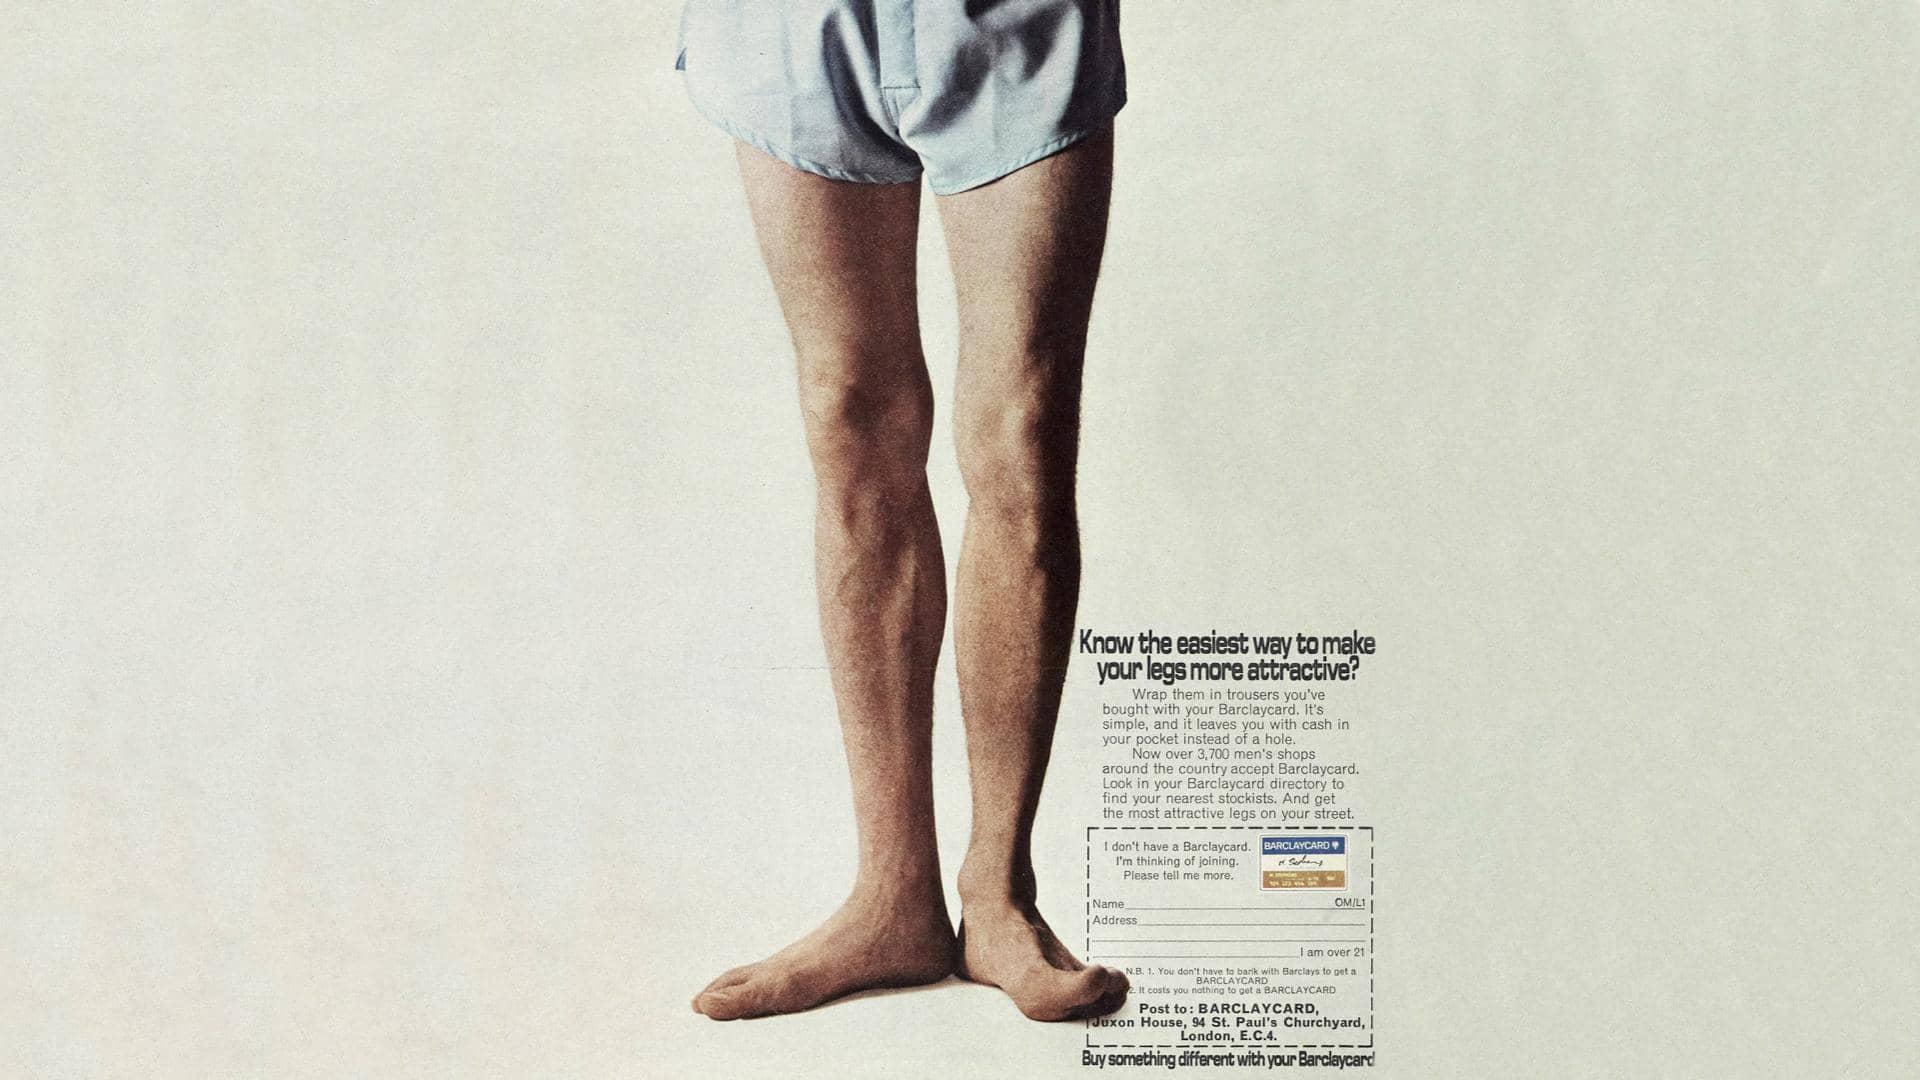 An old Barclays advert with a pair of male legs. The advert reads: "know the easiest way to make your legs more attractive?"